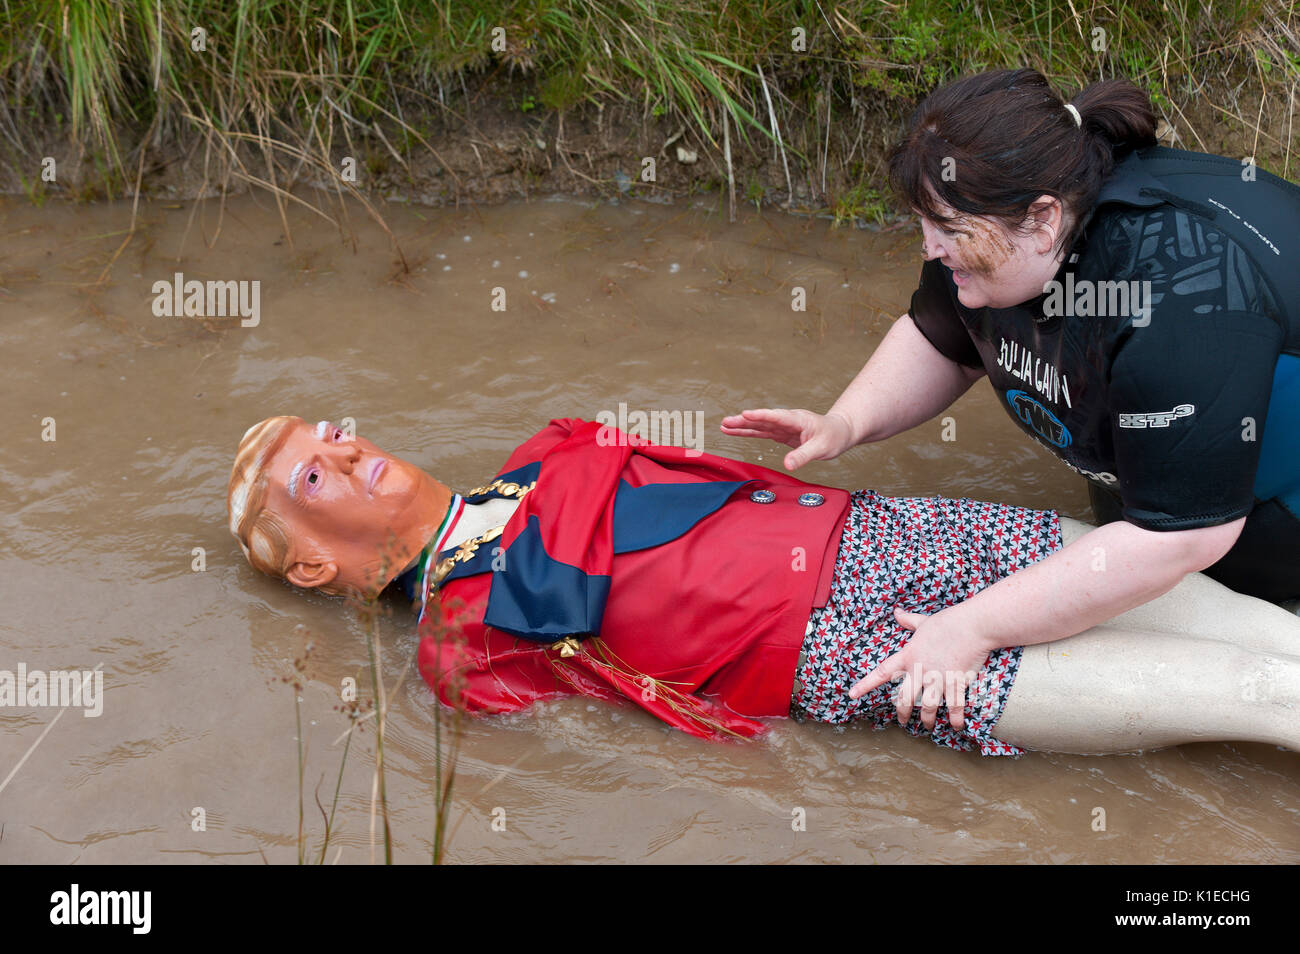 Llanwrtyd Wells, Powys, UK. 27th August, 2017. Bog Snorkelling aficionado Julia Galvin rescues an effigy of Donald Trump in new novelty event which has been added this year - Save Trump from the Bog.The 32nd annual World Bog Snorkelling Championships, conceived over 30 years ago in a Welsh pub by landlord Gordon Green, are held at the Waen Rhydd Bog. Using unconventional swimming strokes, participants swim two lengths of a 55 metre trench cut through a peat bog wearing snorkel mask and flippers. Credit:  Graham M. Lawrence/Alamy Live News Stock Photo